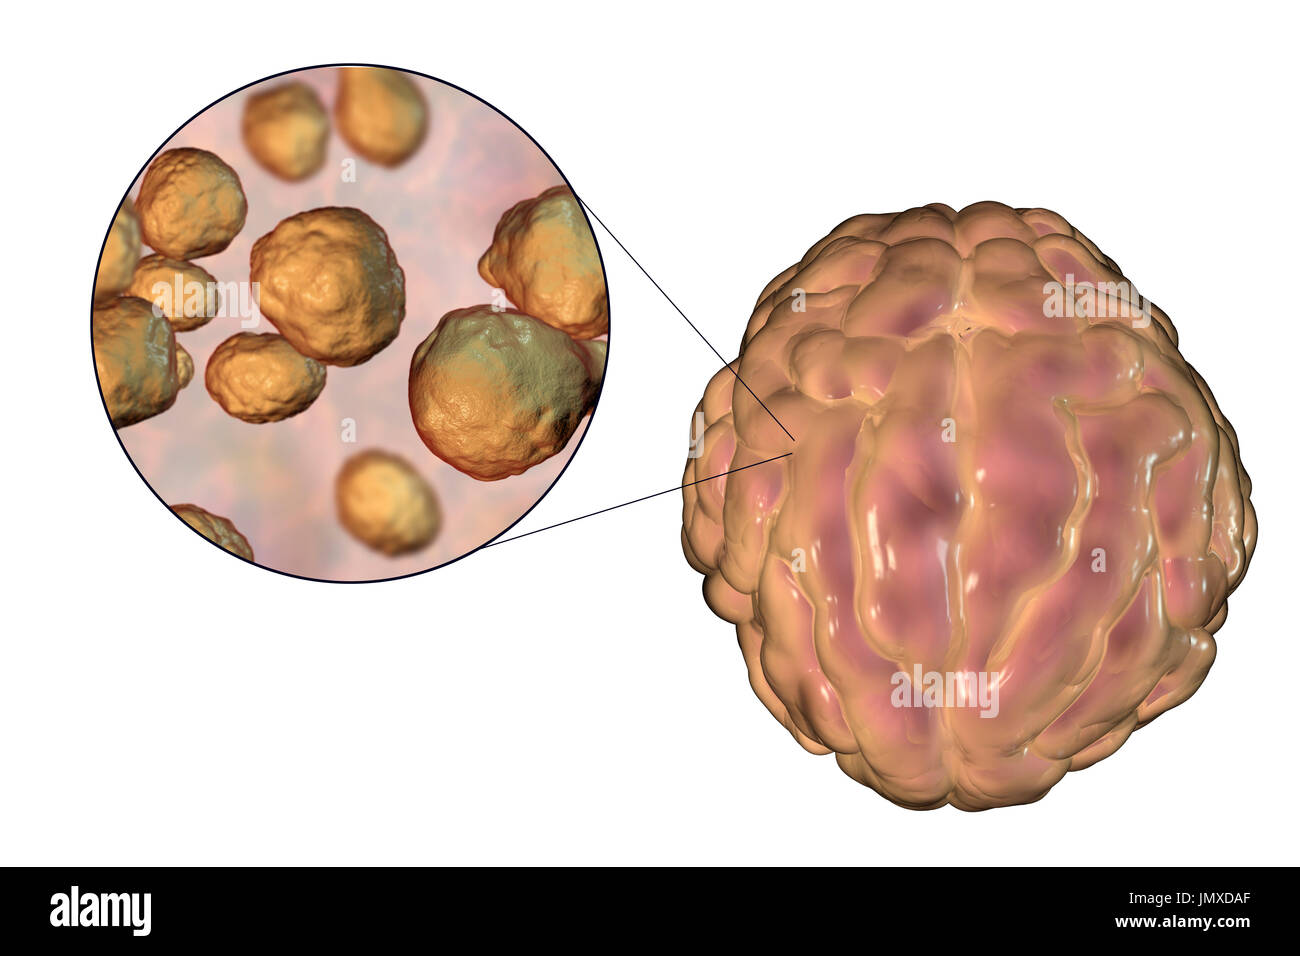 Meningitis caused by the fungus Cryptococcus, computer illustration. Cryptococcus neoformans is the common cause of meningitis in HIV-infected patients. The illustration shows swelling of meninges and close-up view of C. neoformans. Stock Photo